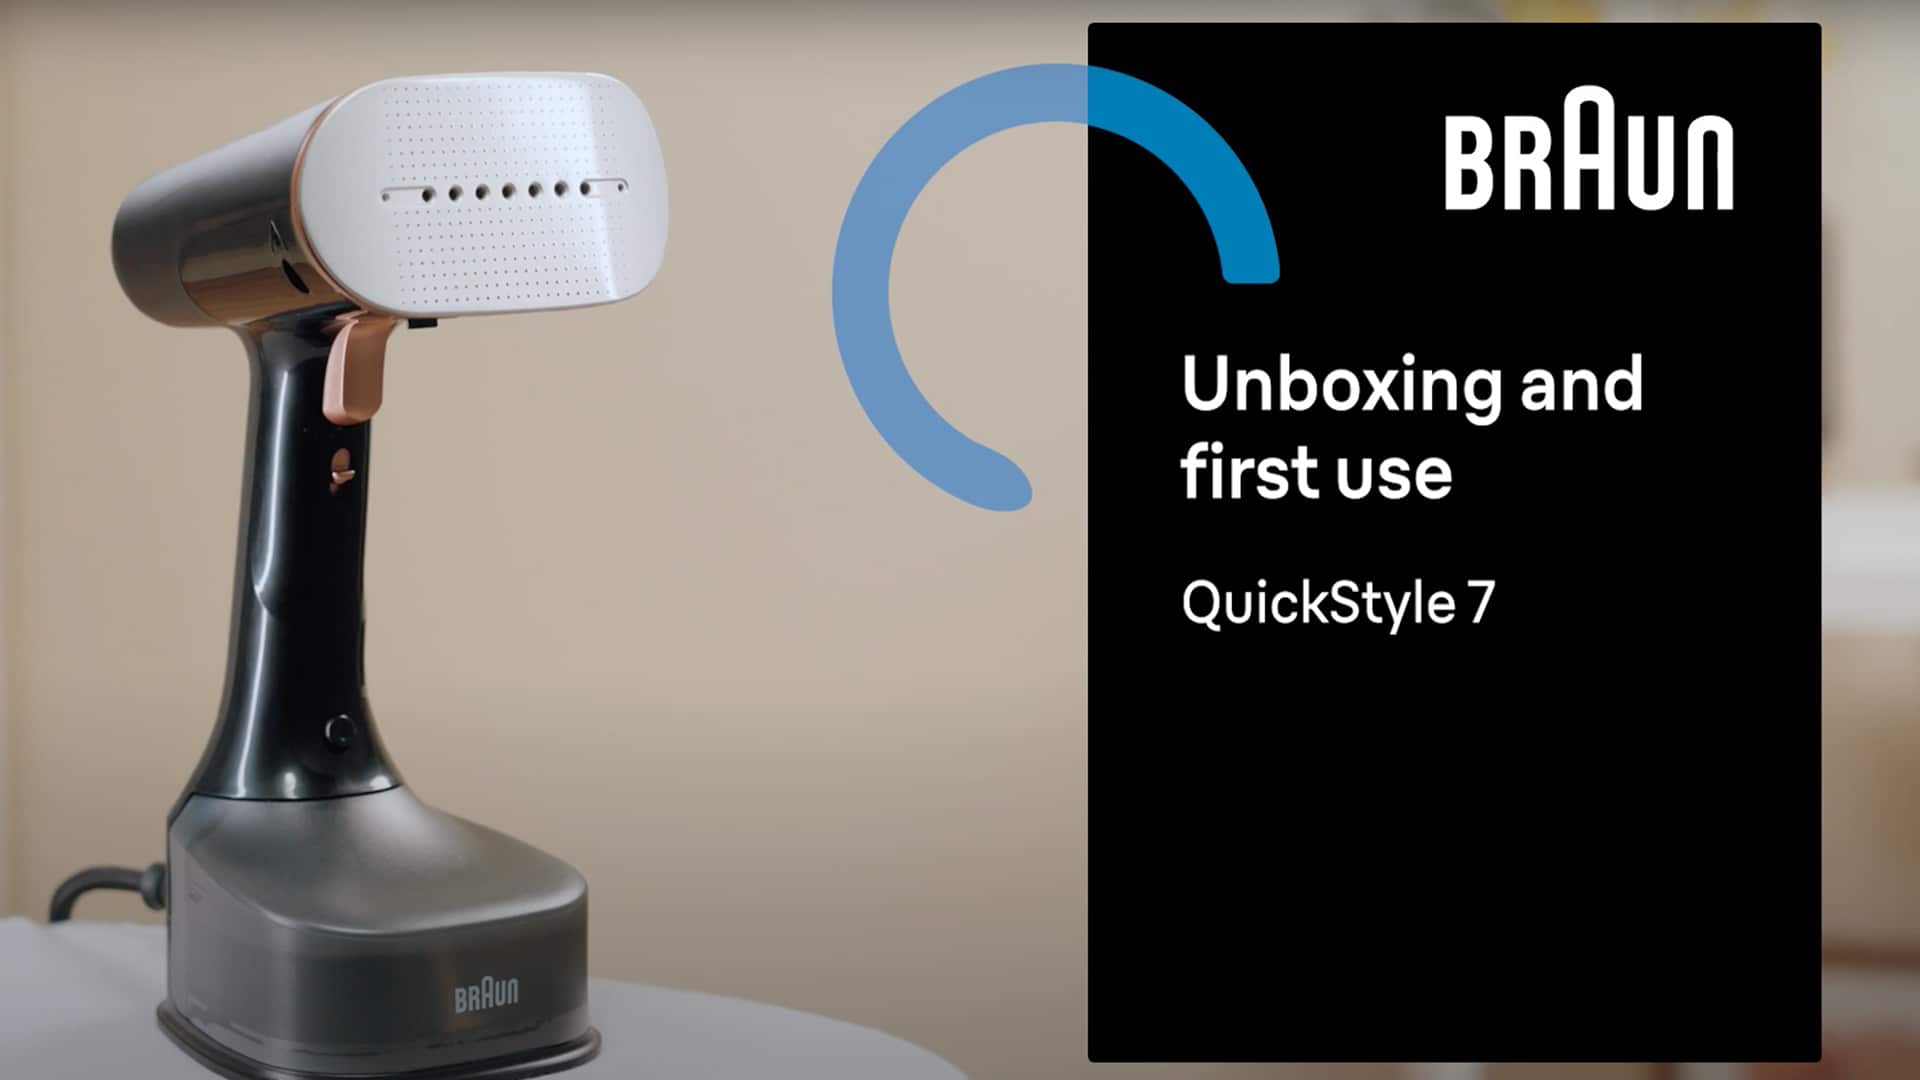 Braun QuickStyle 7 - Unboxing and set up 